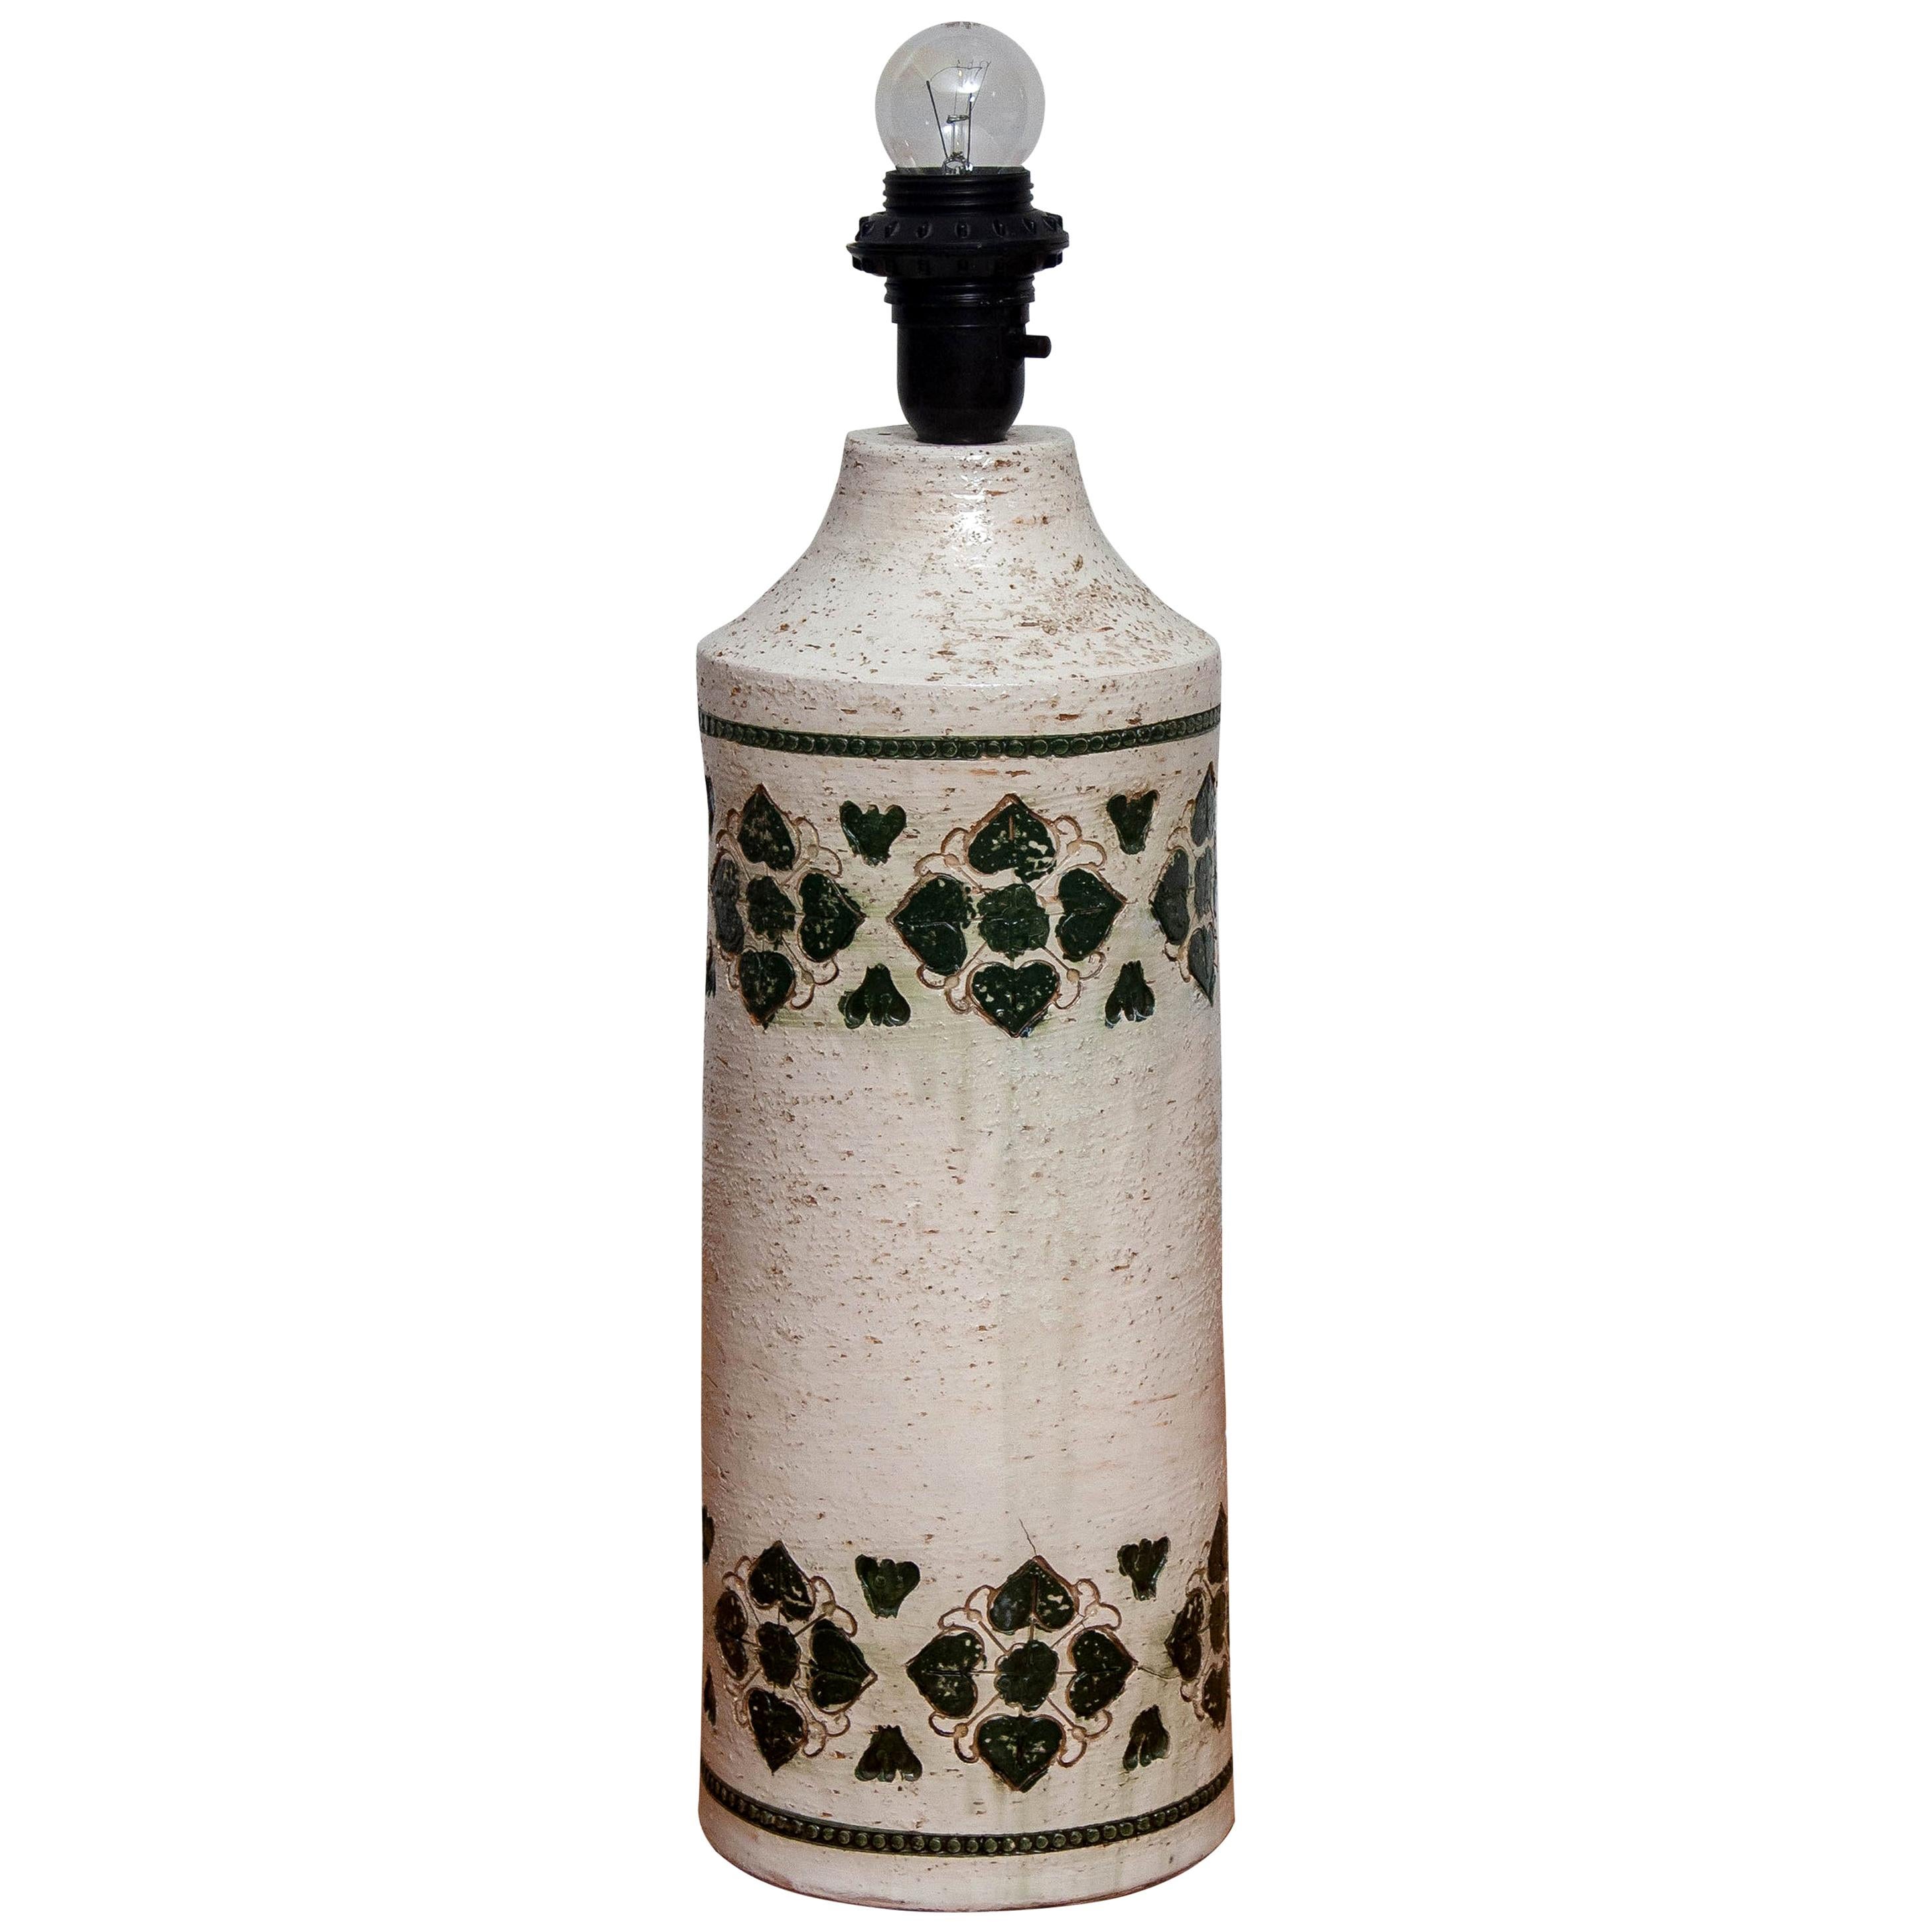 Very nice Italian ceramic lamp with an incised ivory or white and dark green geometric pattern.
This lamp is made by Bitossi for Bergboms.
 